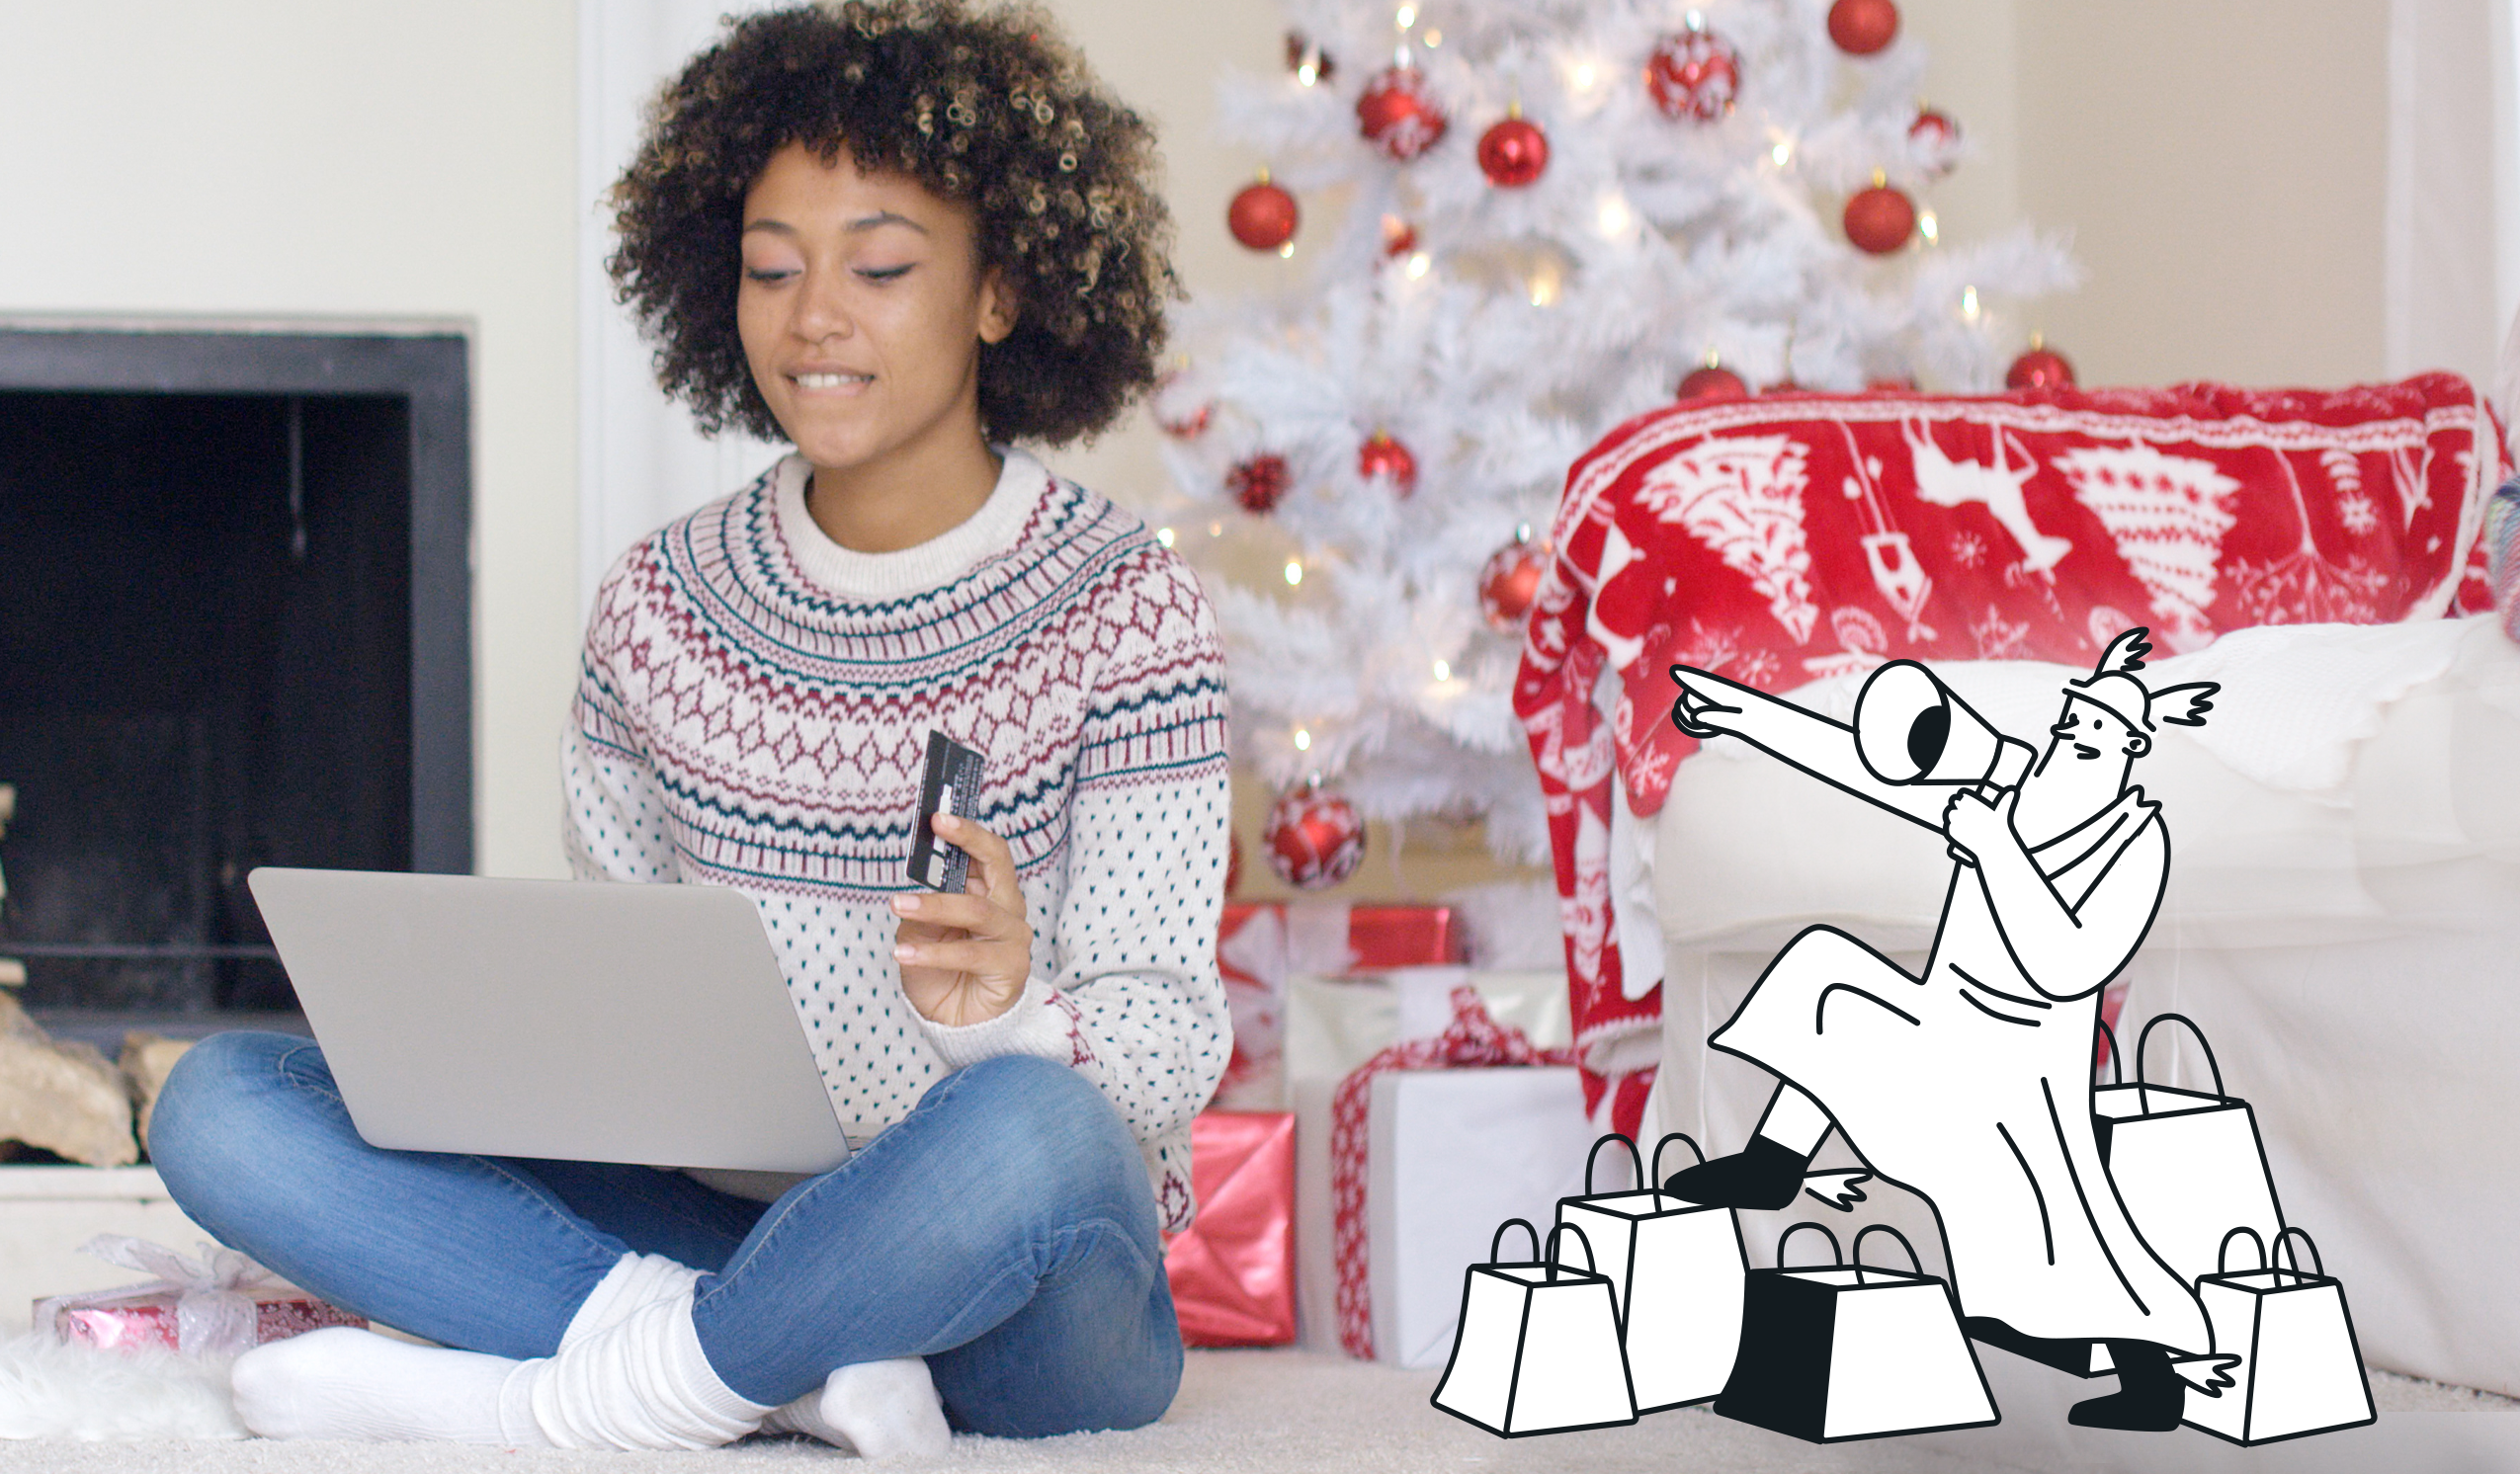 women shops online for black friday deals next to a christmas tree